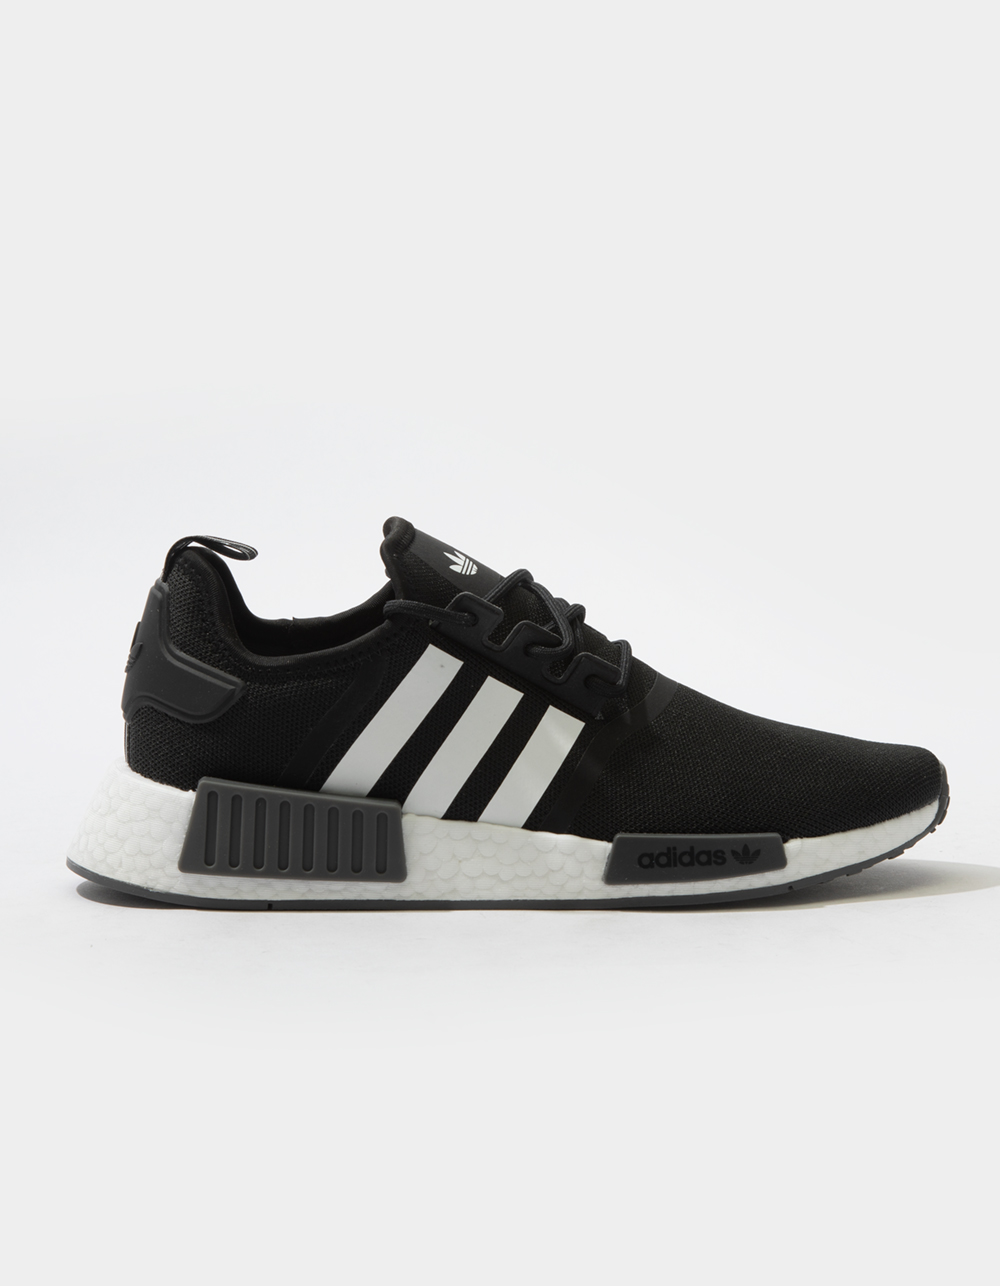 ADIDAS NMD R1 Primeblue Shoes - BLK/WHT | Tillys